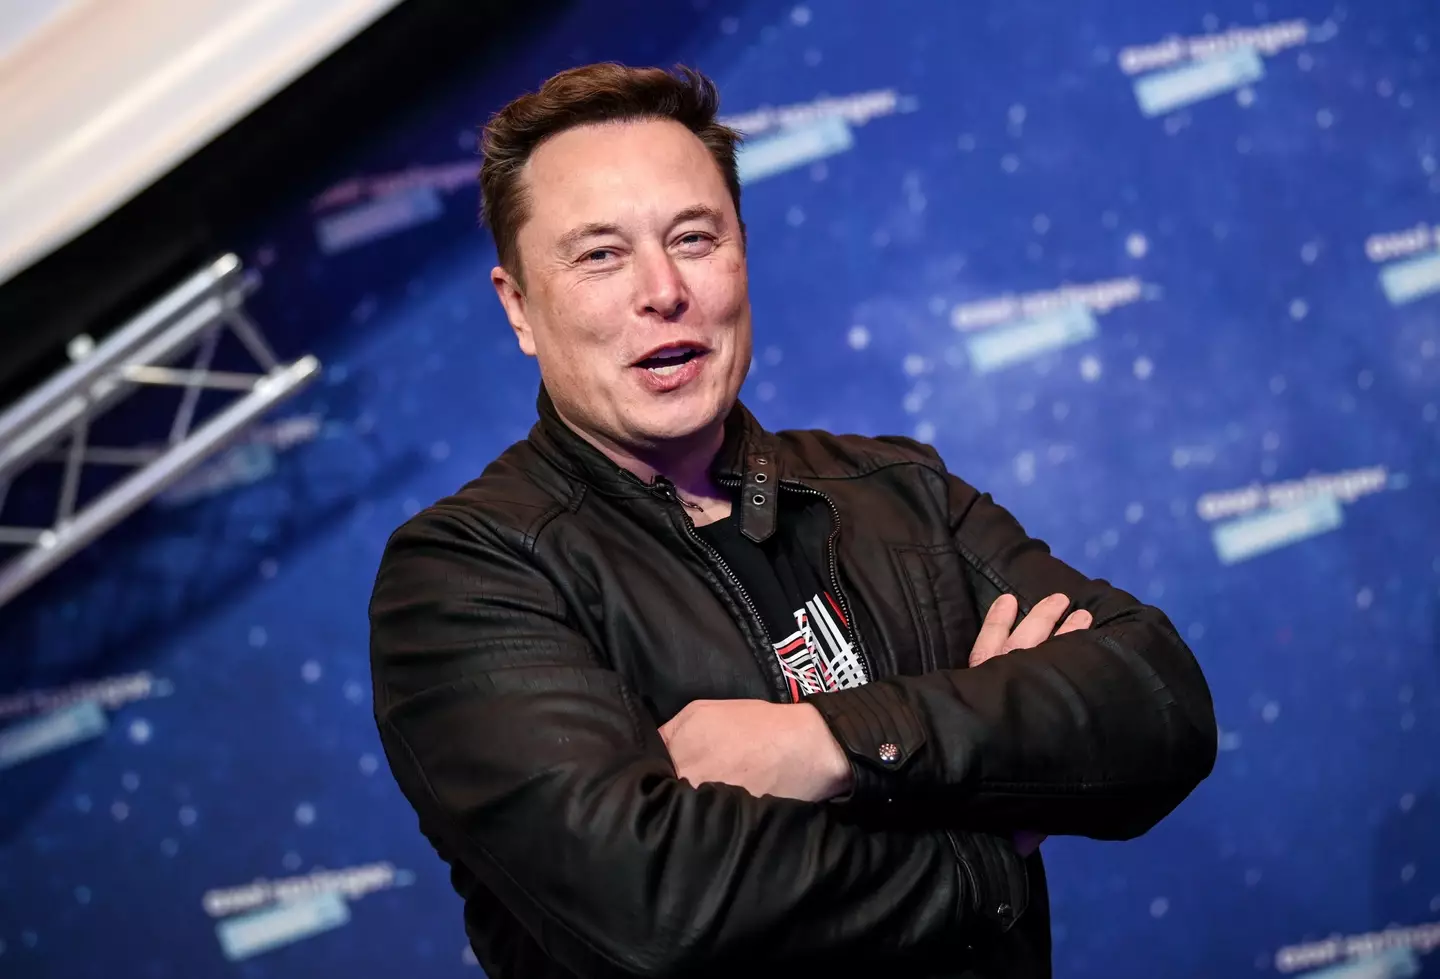 Elon Musk is set to become Twitter's new owner.